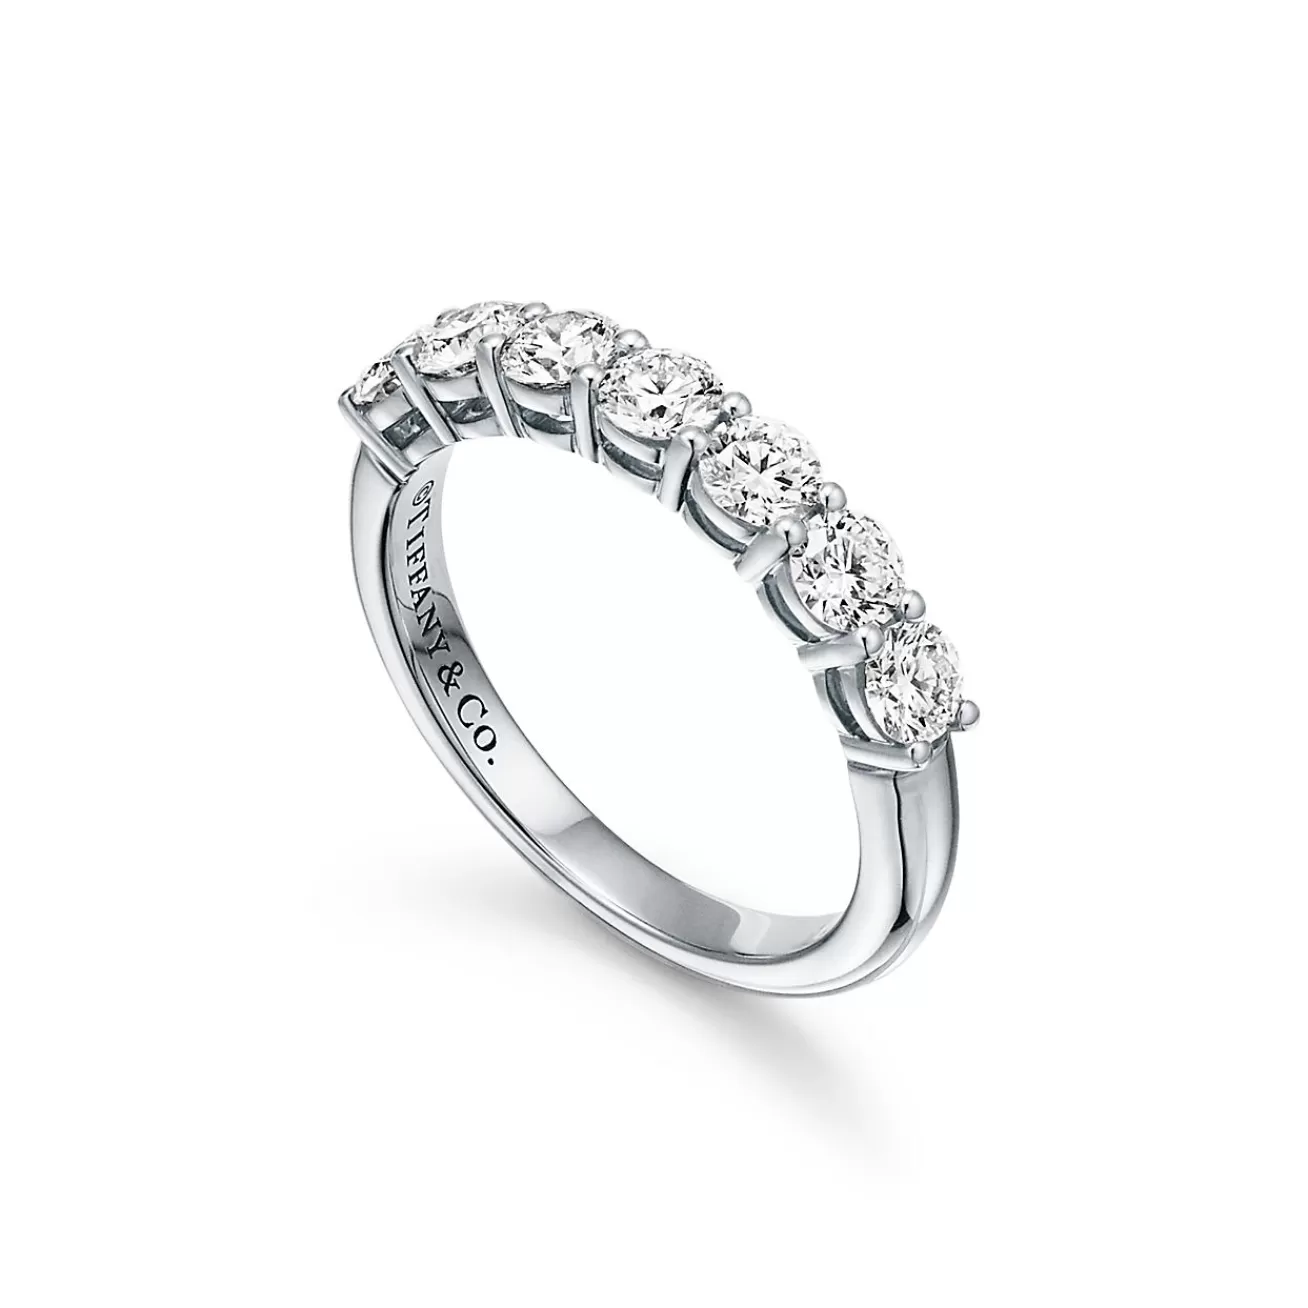 Tiffany & Co. Tiffany Forever Band Ring in Platinum with a Half-circle of Diamonds, 3.5 mm | ^Women Rings | Stacking Rings